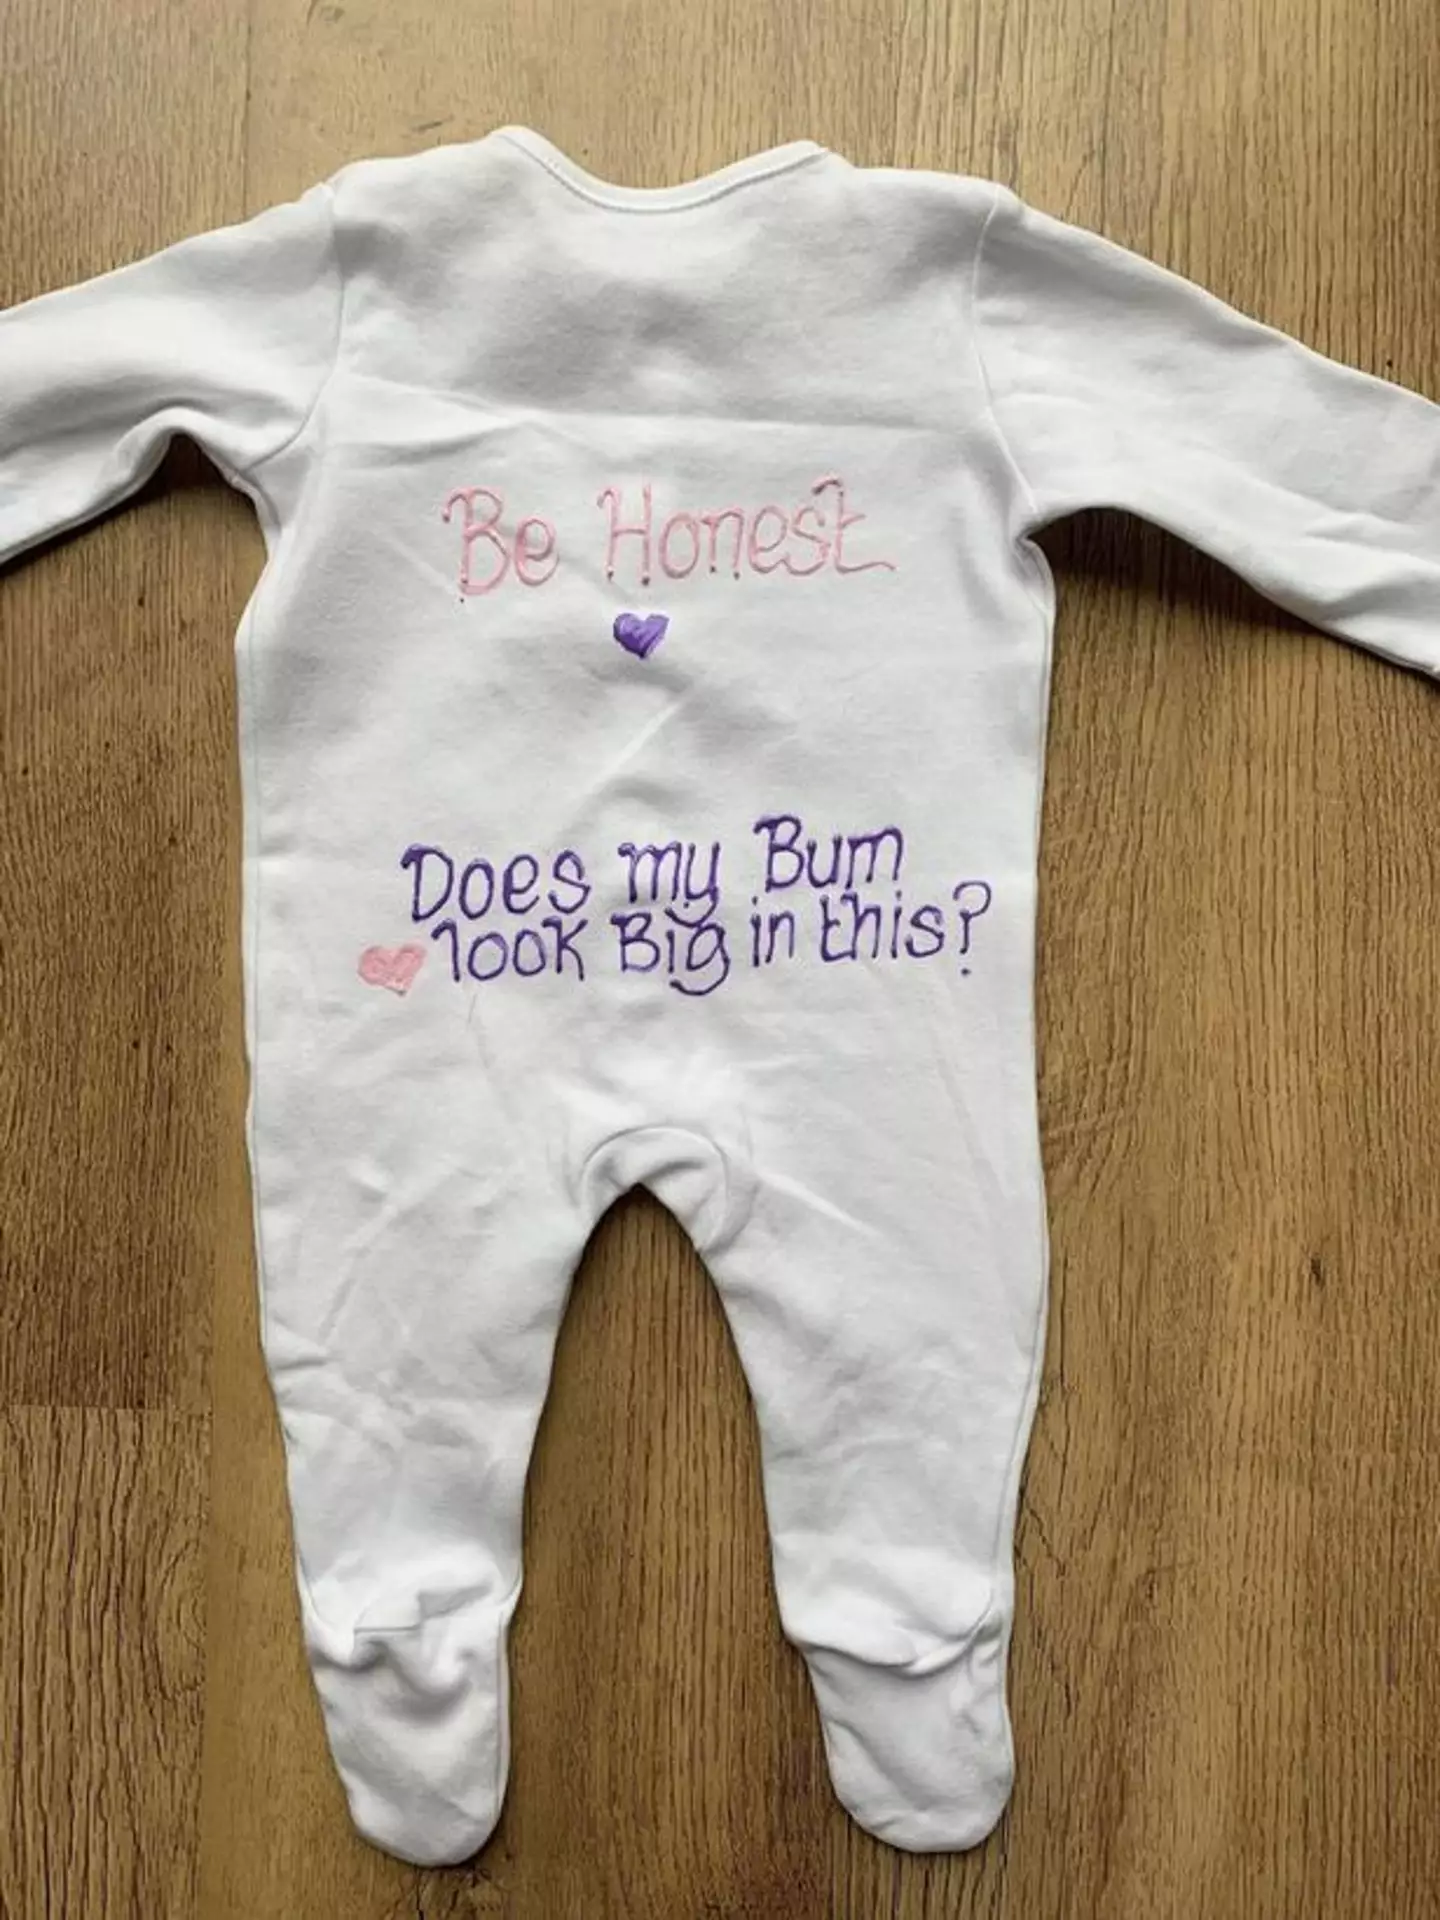 The babygrows retail for £7.